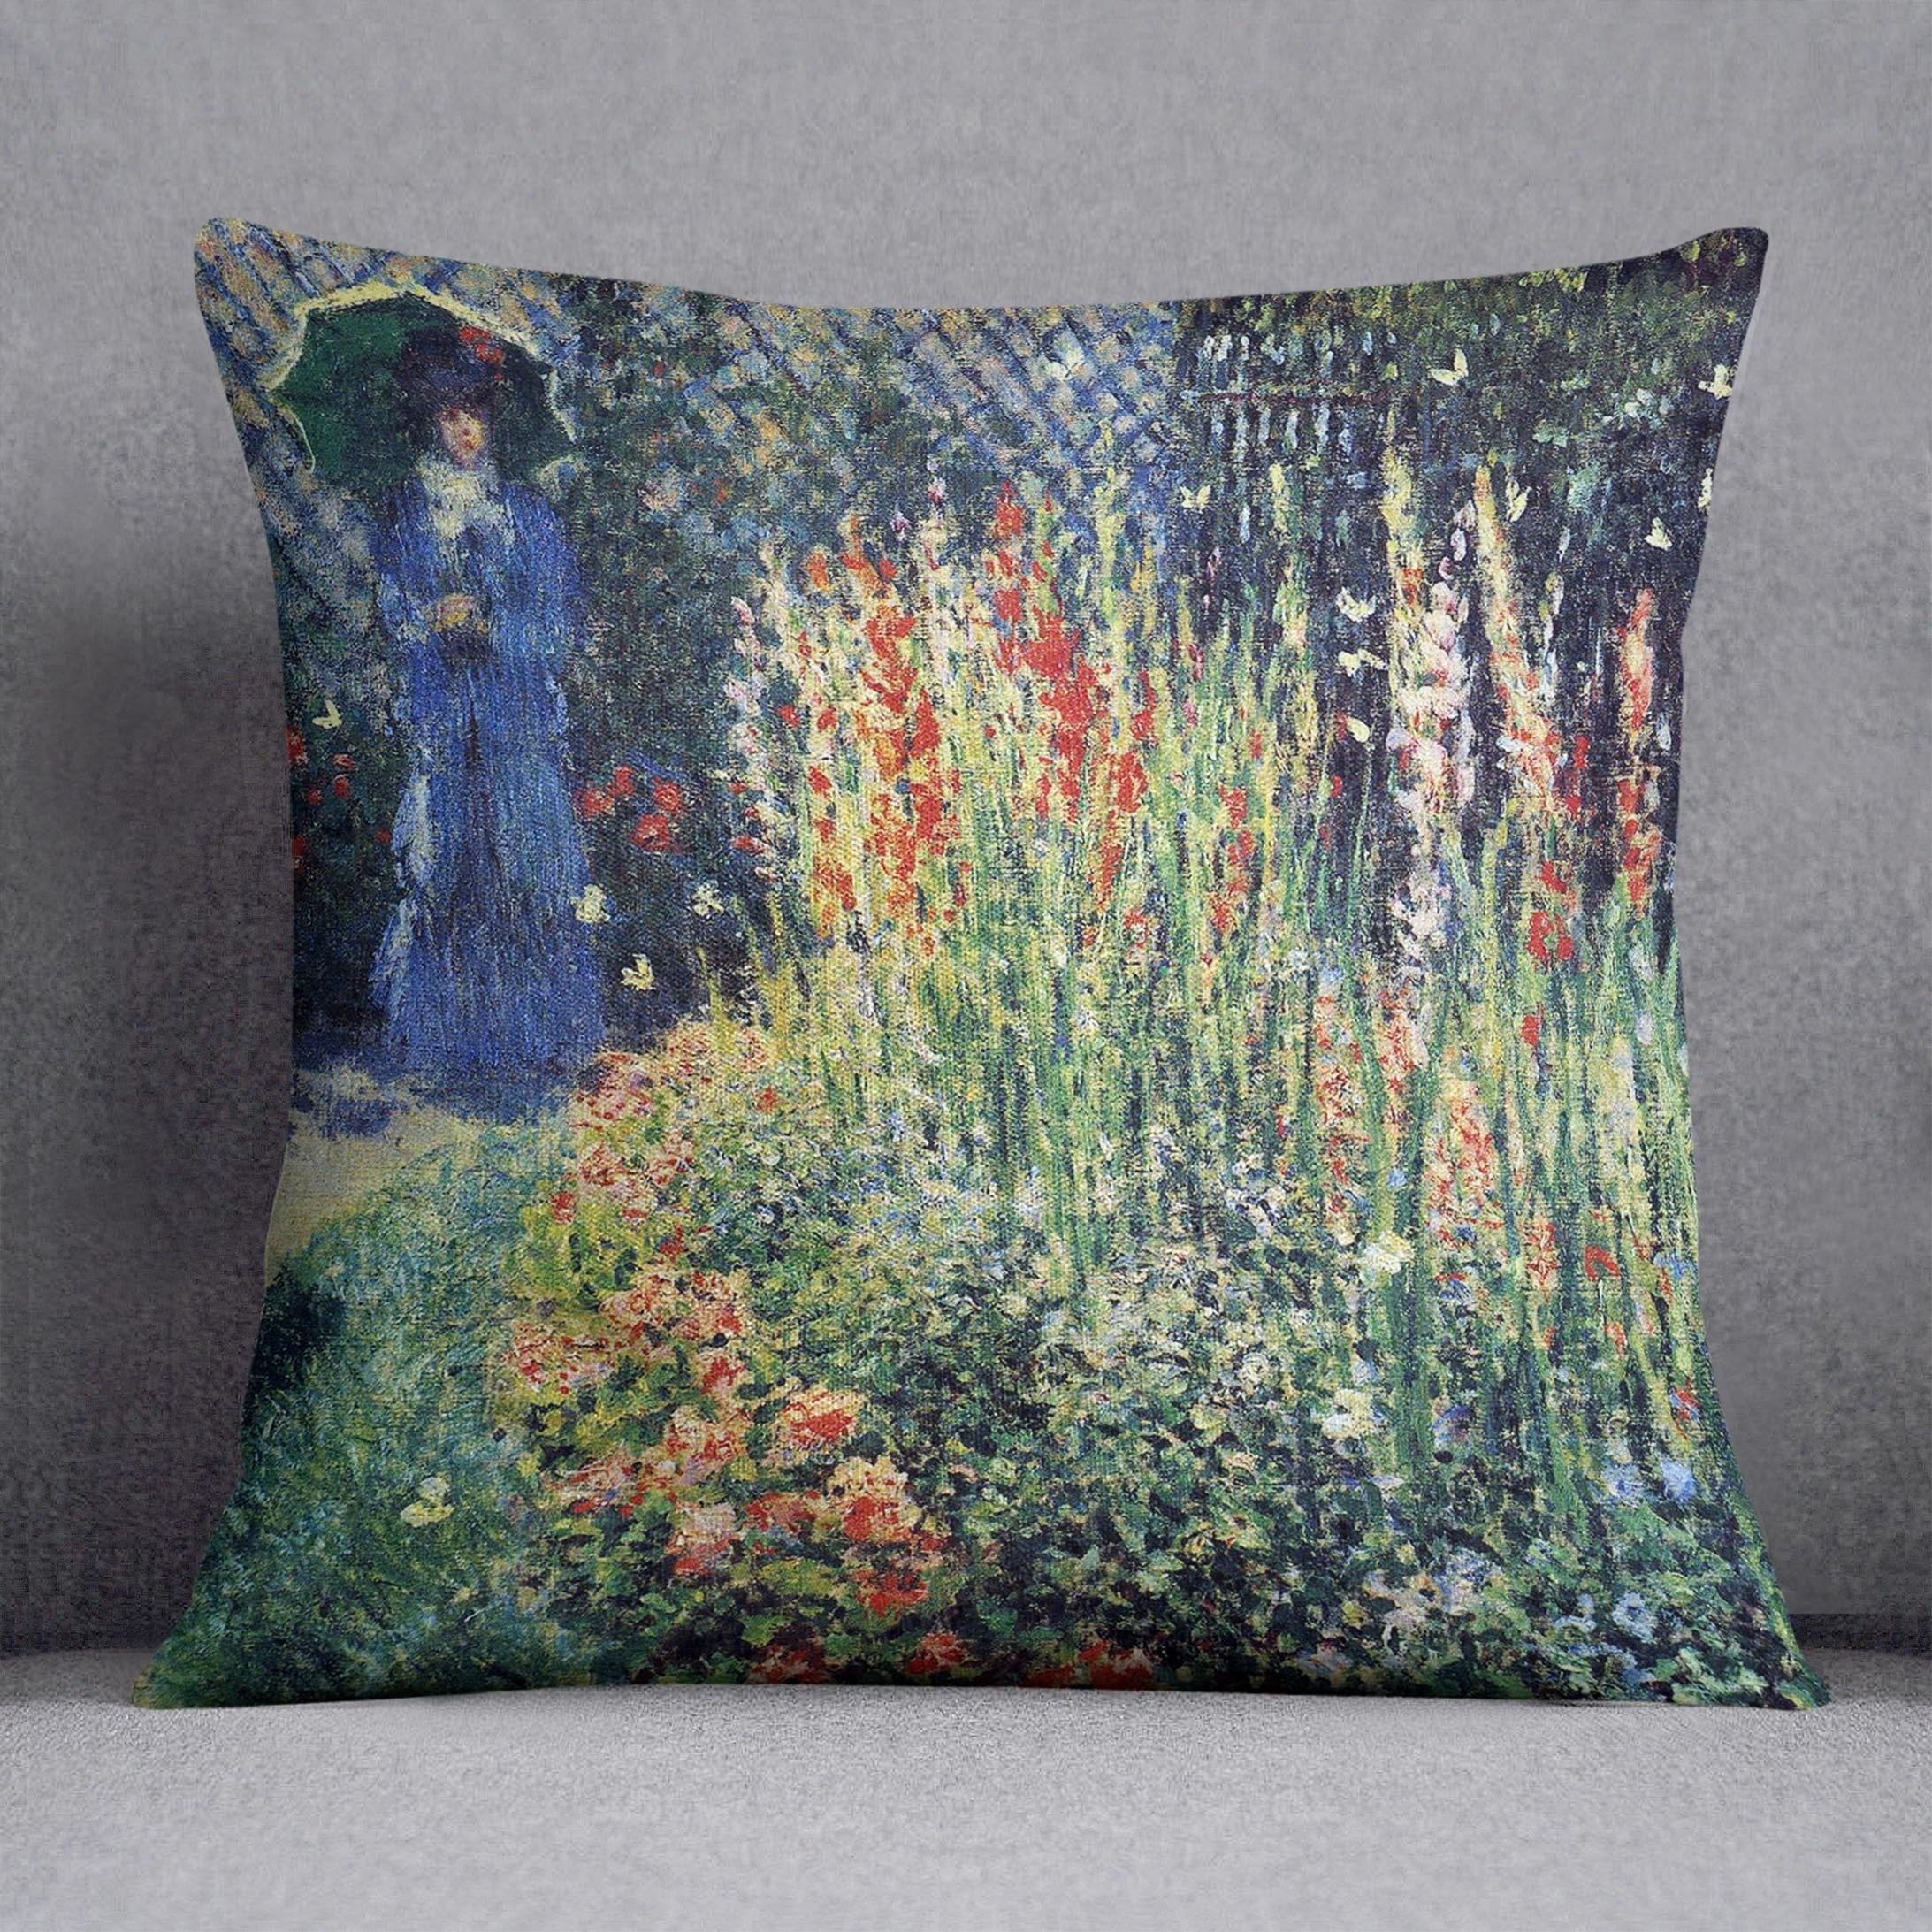 Gladiolas by Monet Throw Pillow